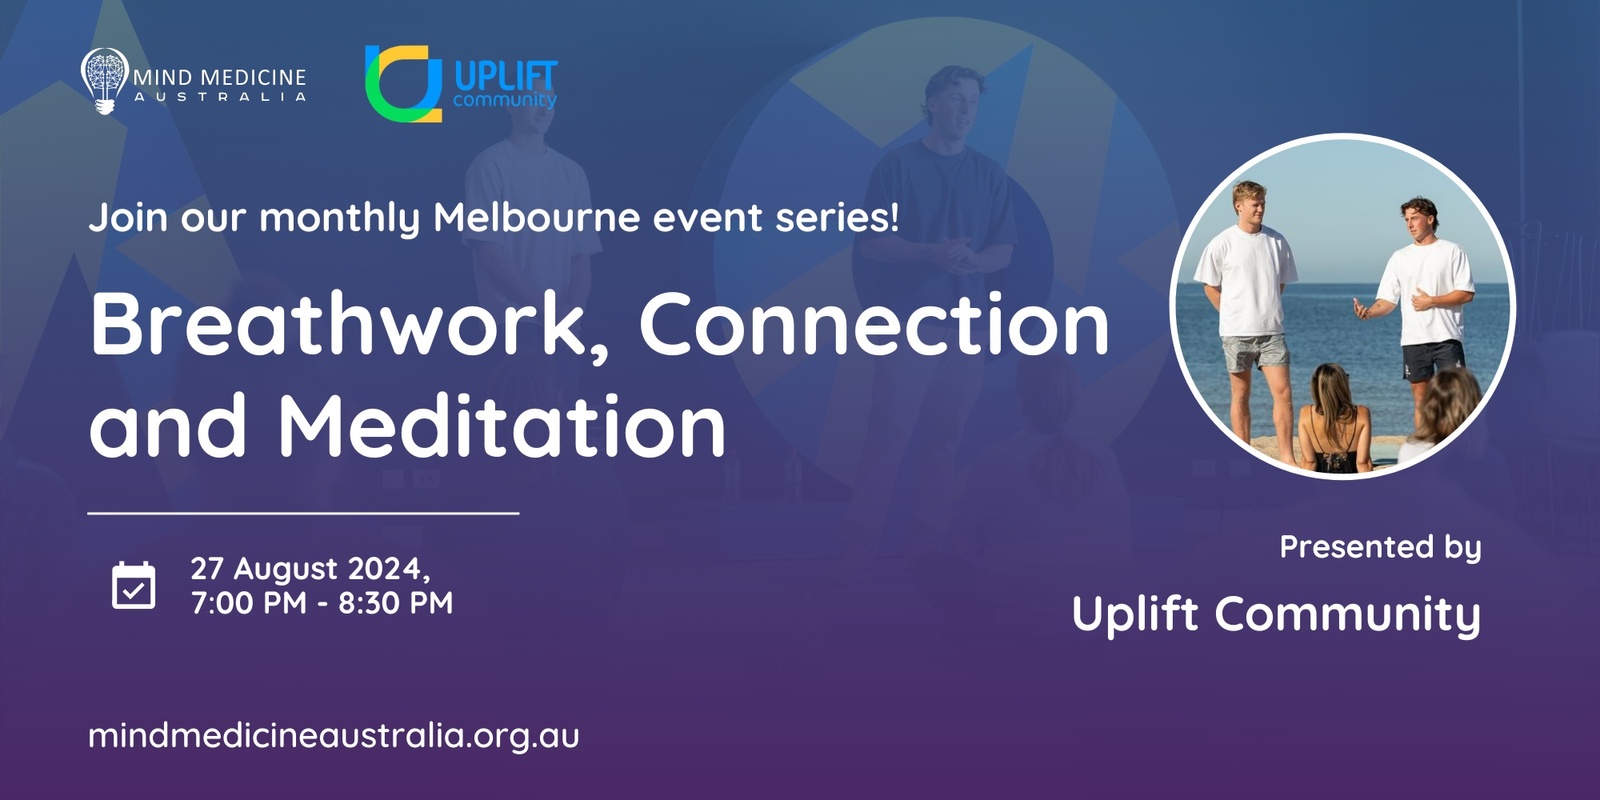 Banner image for Mind Medicine Australia Monthly Community Event:  Breathwork, Connection and Meditation with Uplift Community